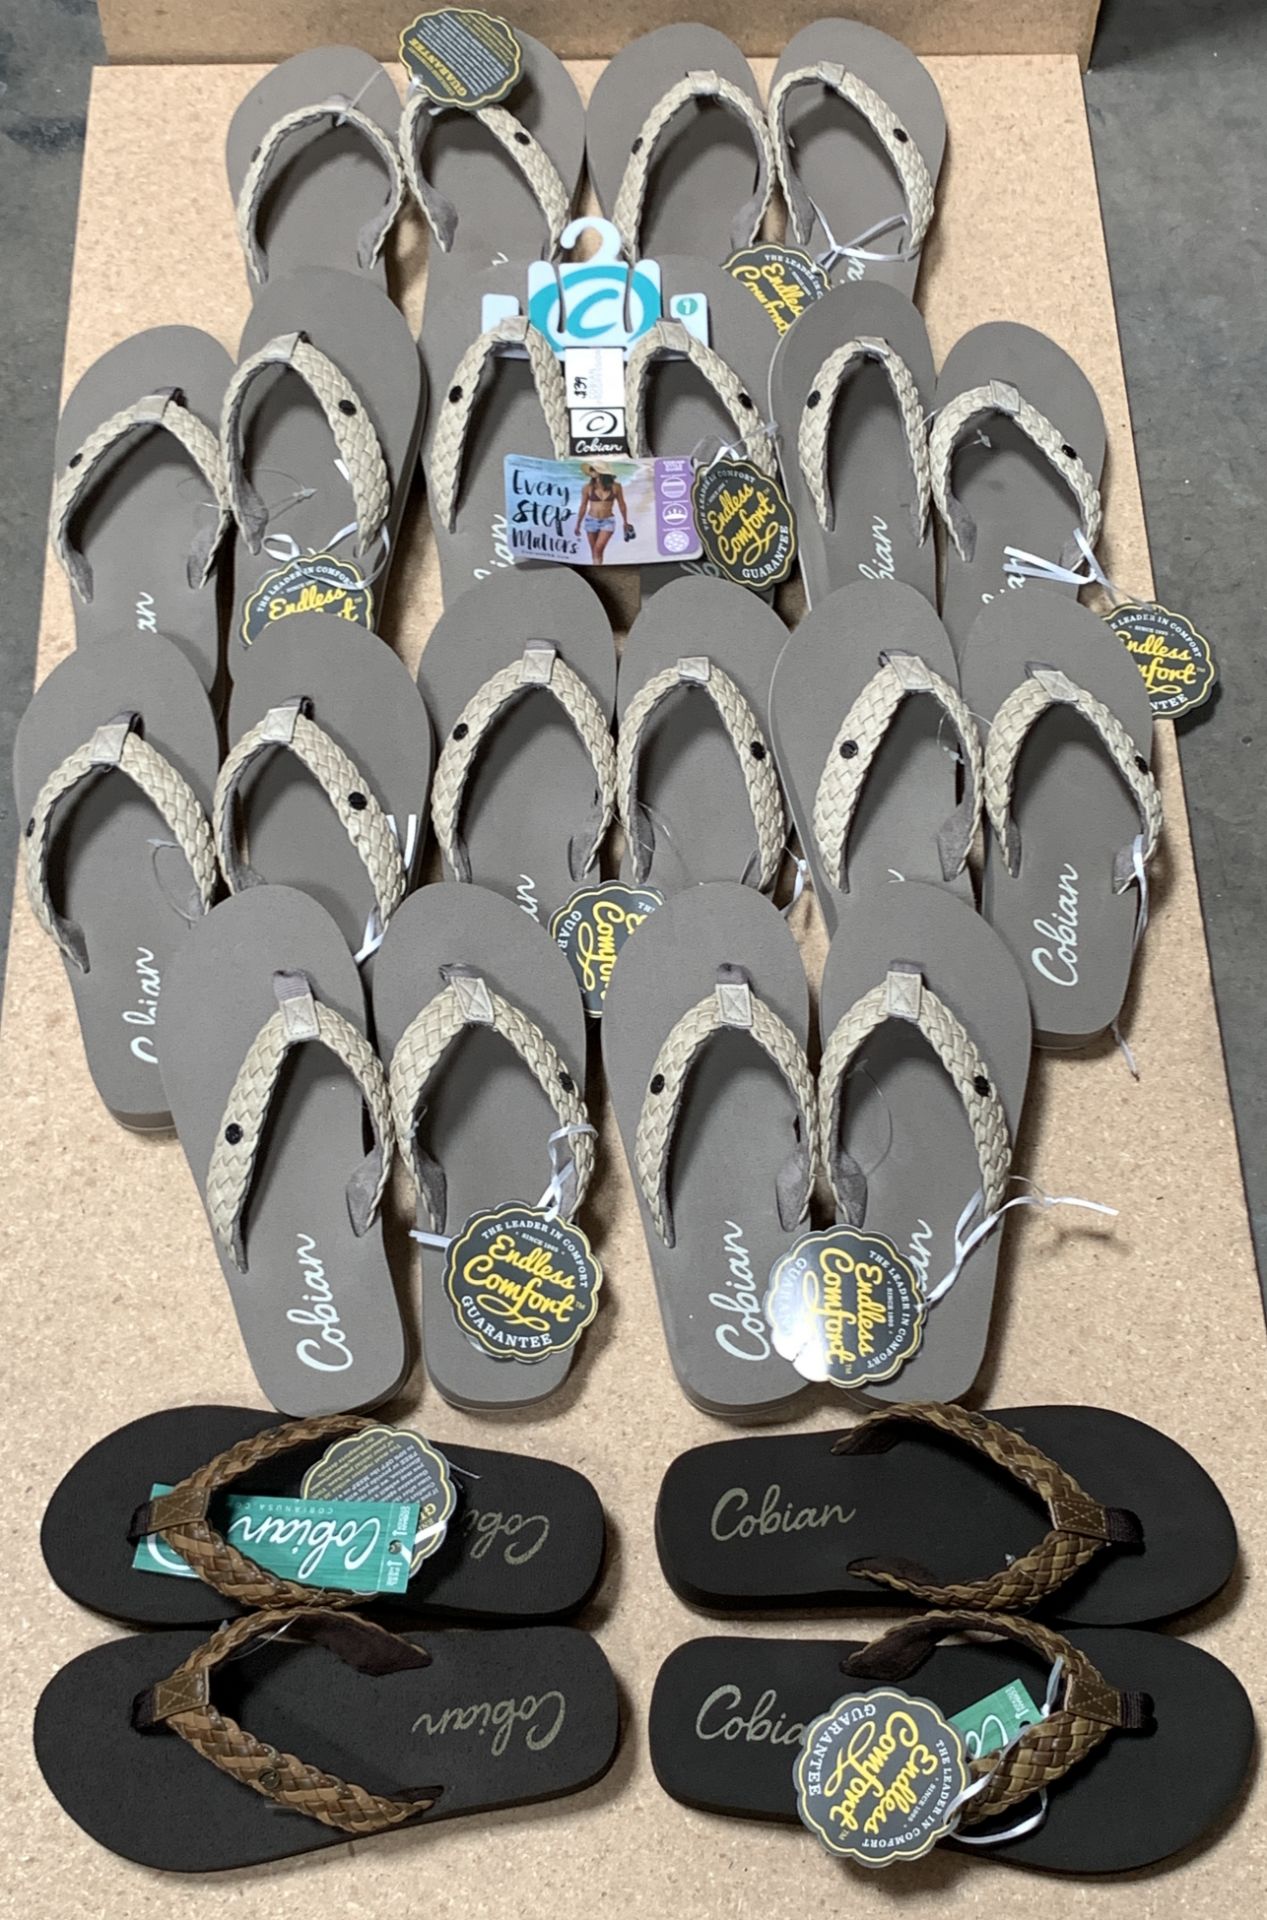 12 Pairs Cobian Flip Flop Sandals, Braided Bounce, New w. Tags, Various Sizes (Retail $468) - Image 2 of 6